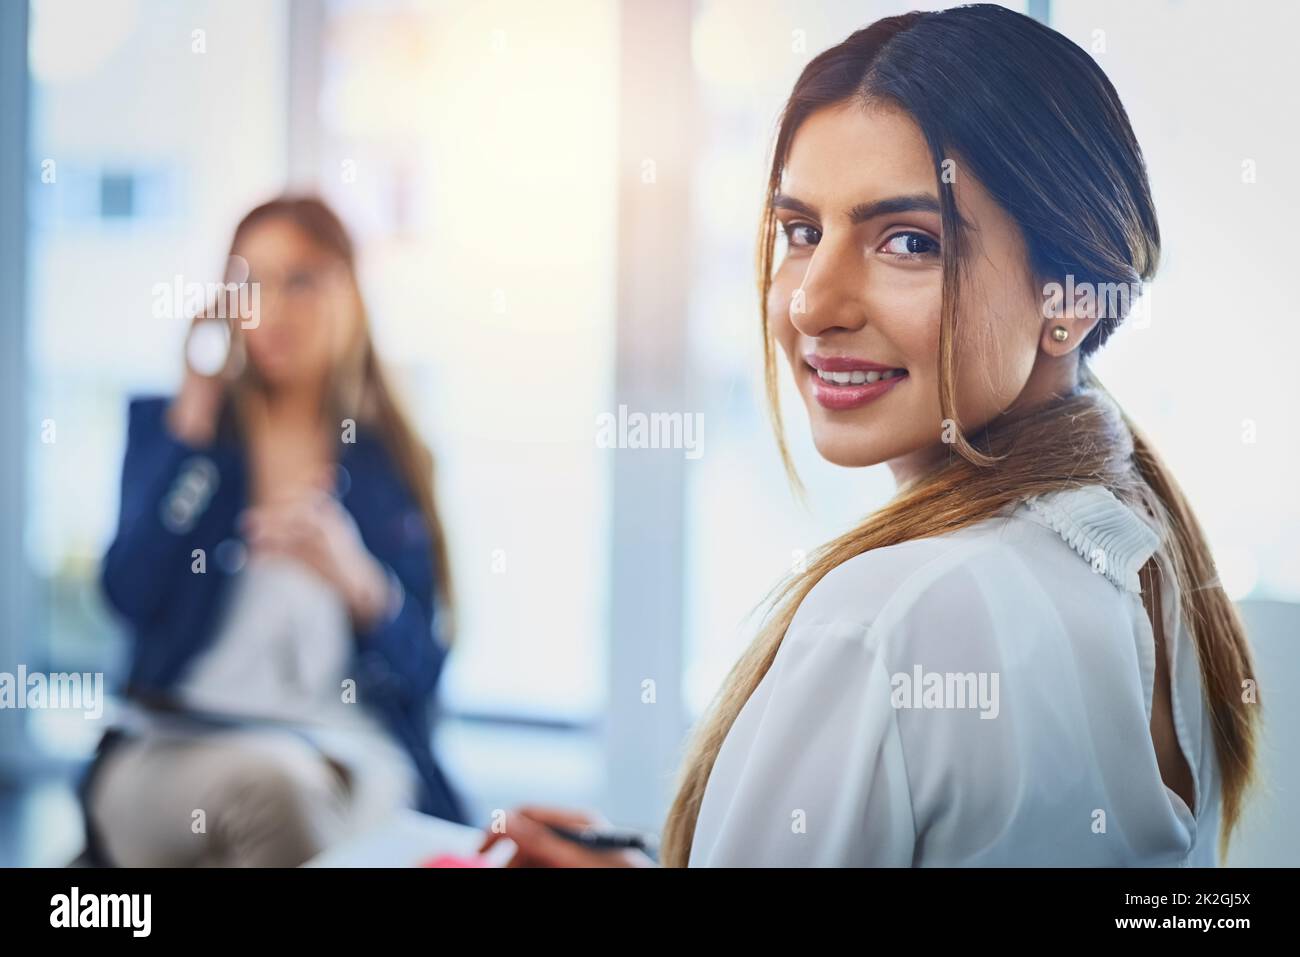 Were the ones who turn your ideas into reality. Portrait of an attractive young businesswoman taking down notes on her notepad during a meeting with her colleagues at work. Stock Photo